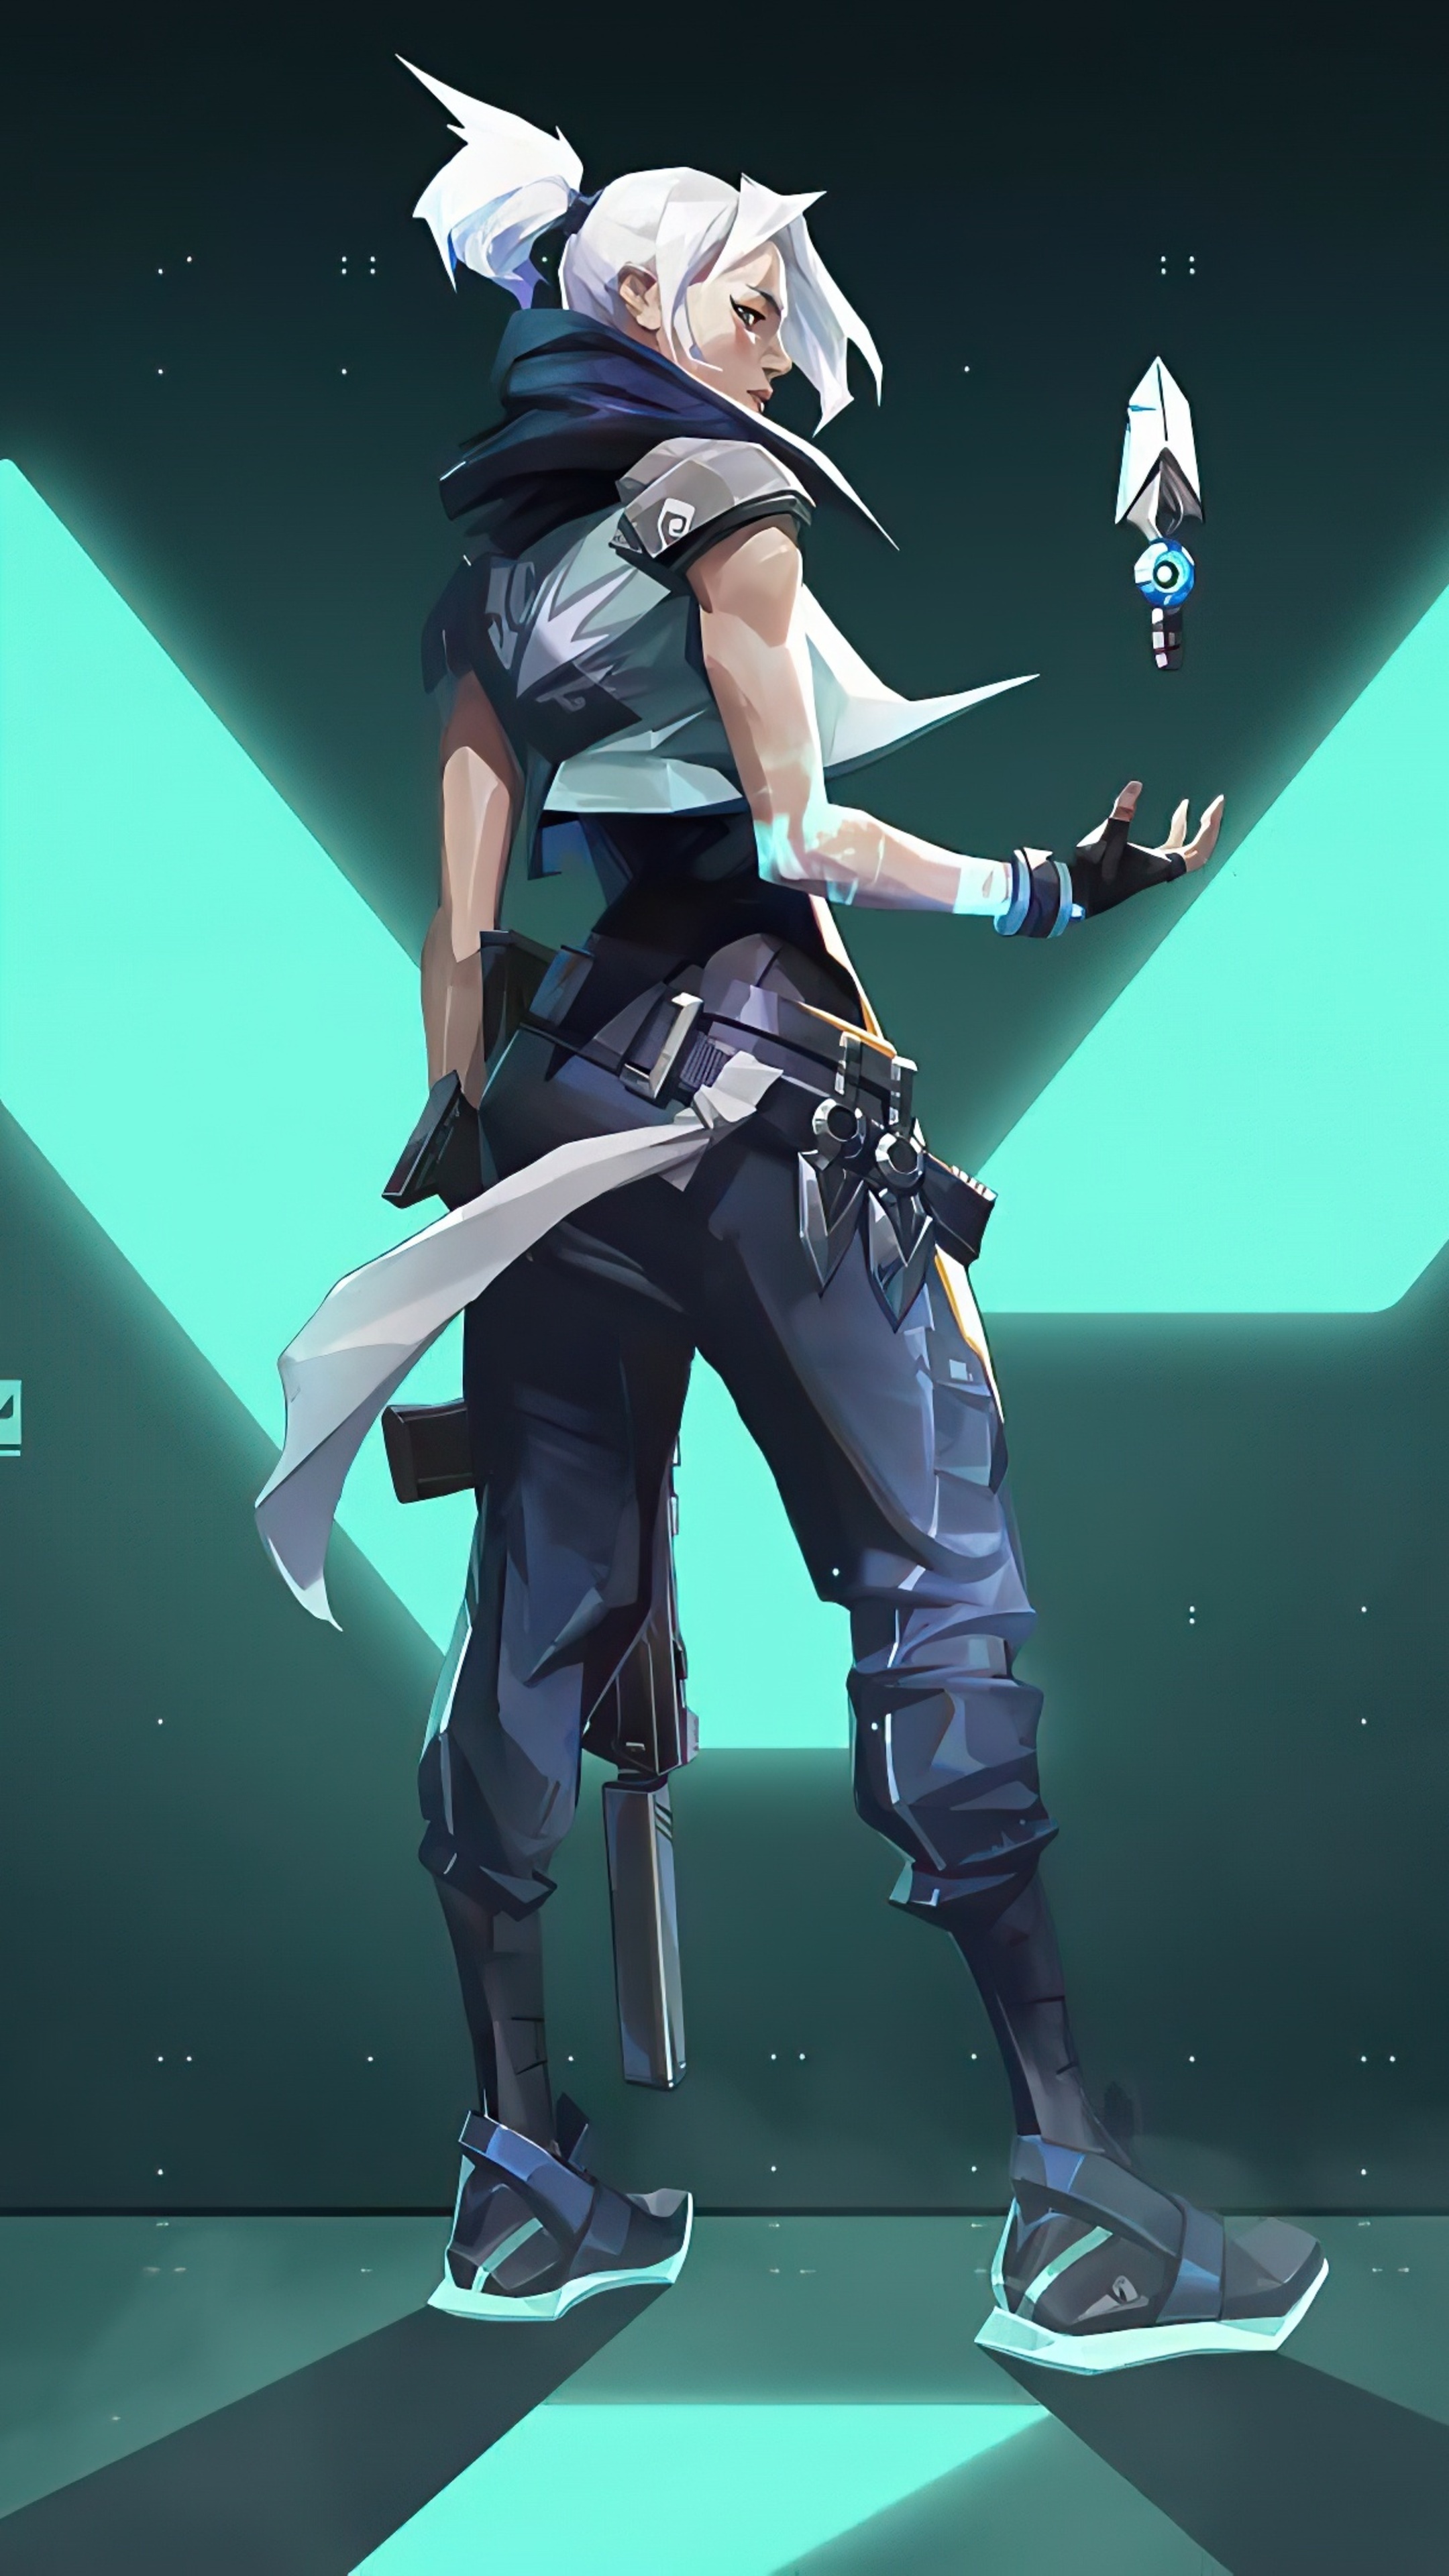 Jett's swift moves, Sony Xperia wallpapers, 4K gaming visuals, Game character portraits, 2160x3840 4K Handy